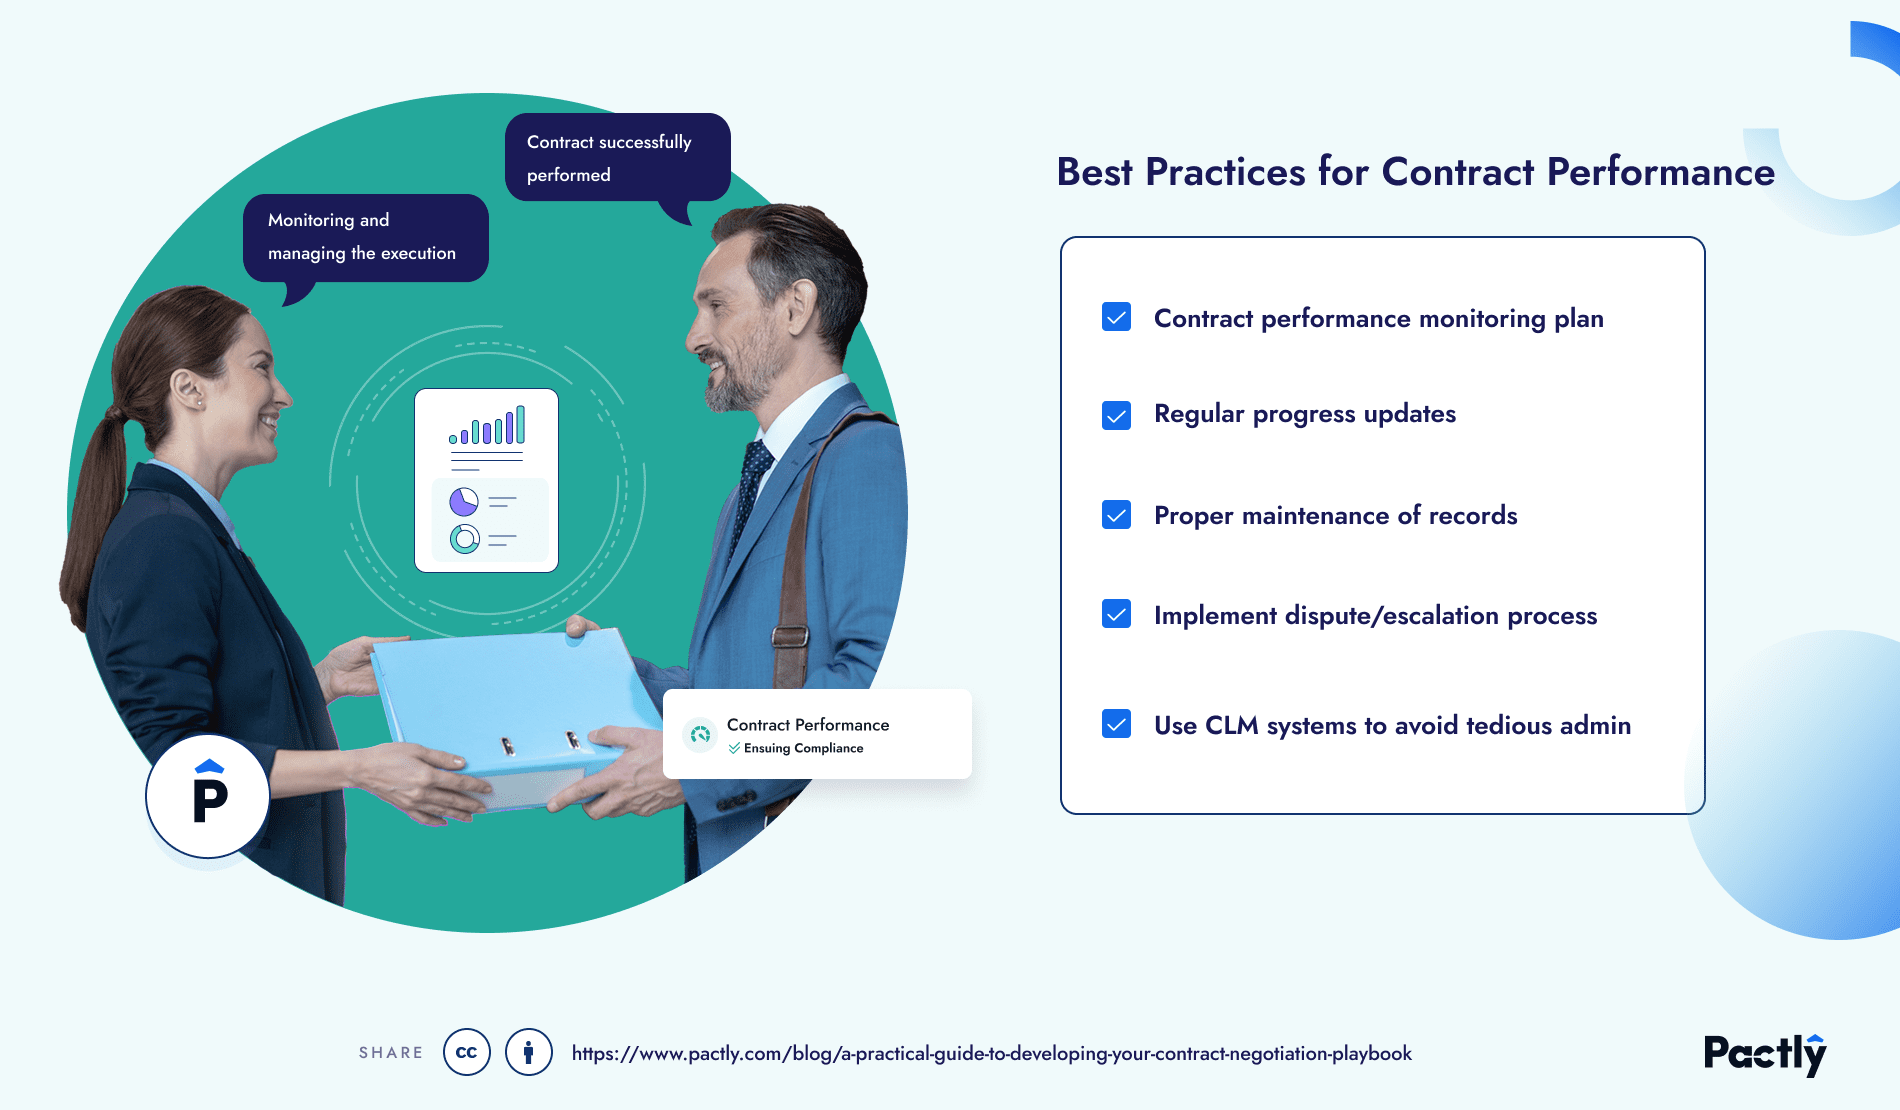 Best practices for contract performance